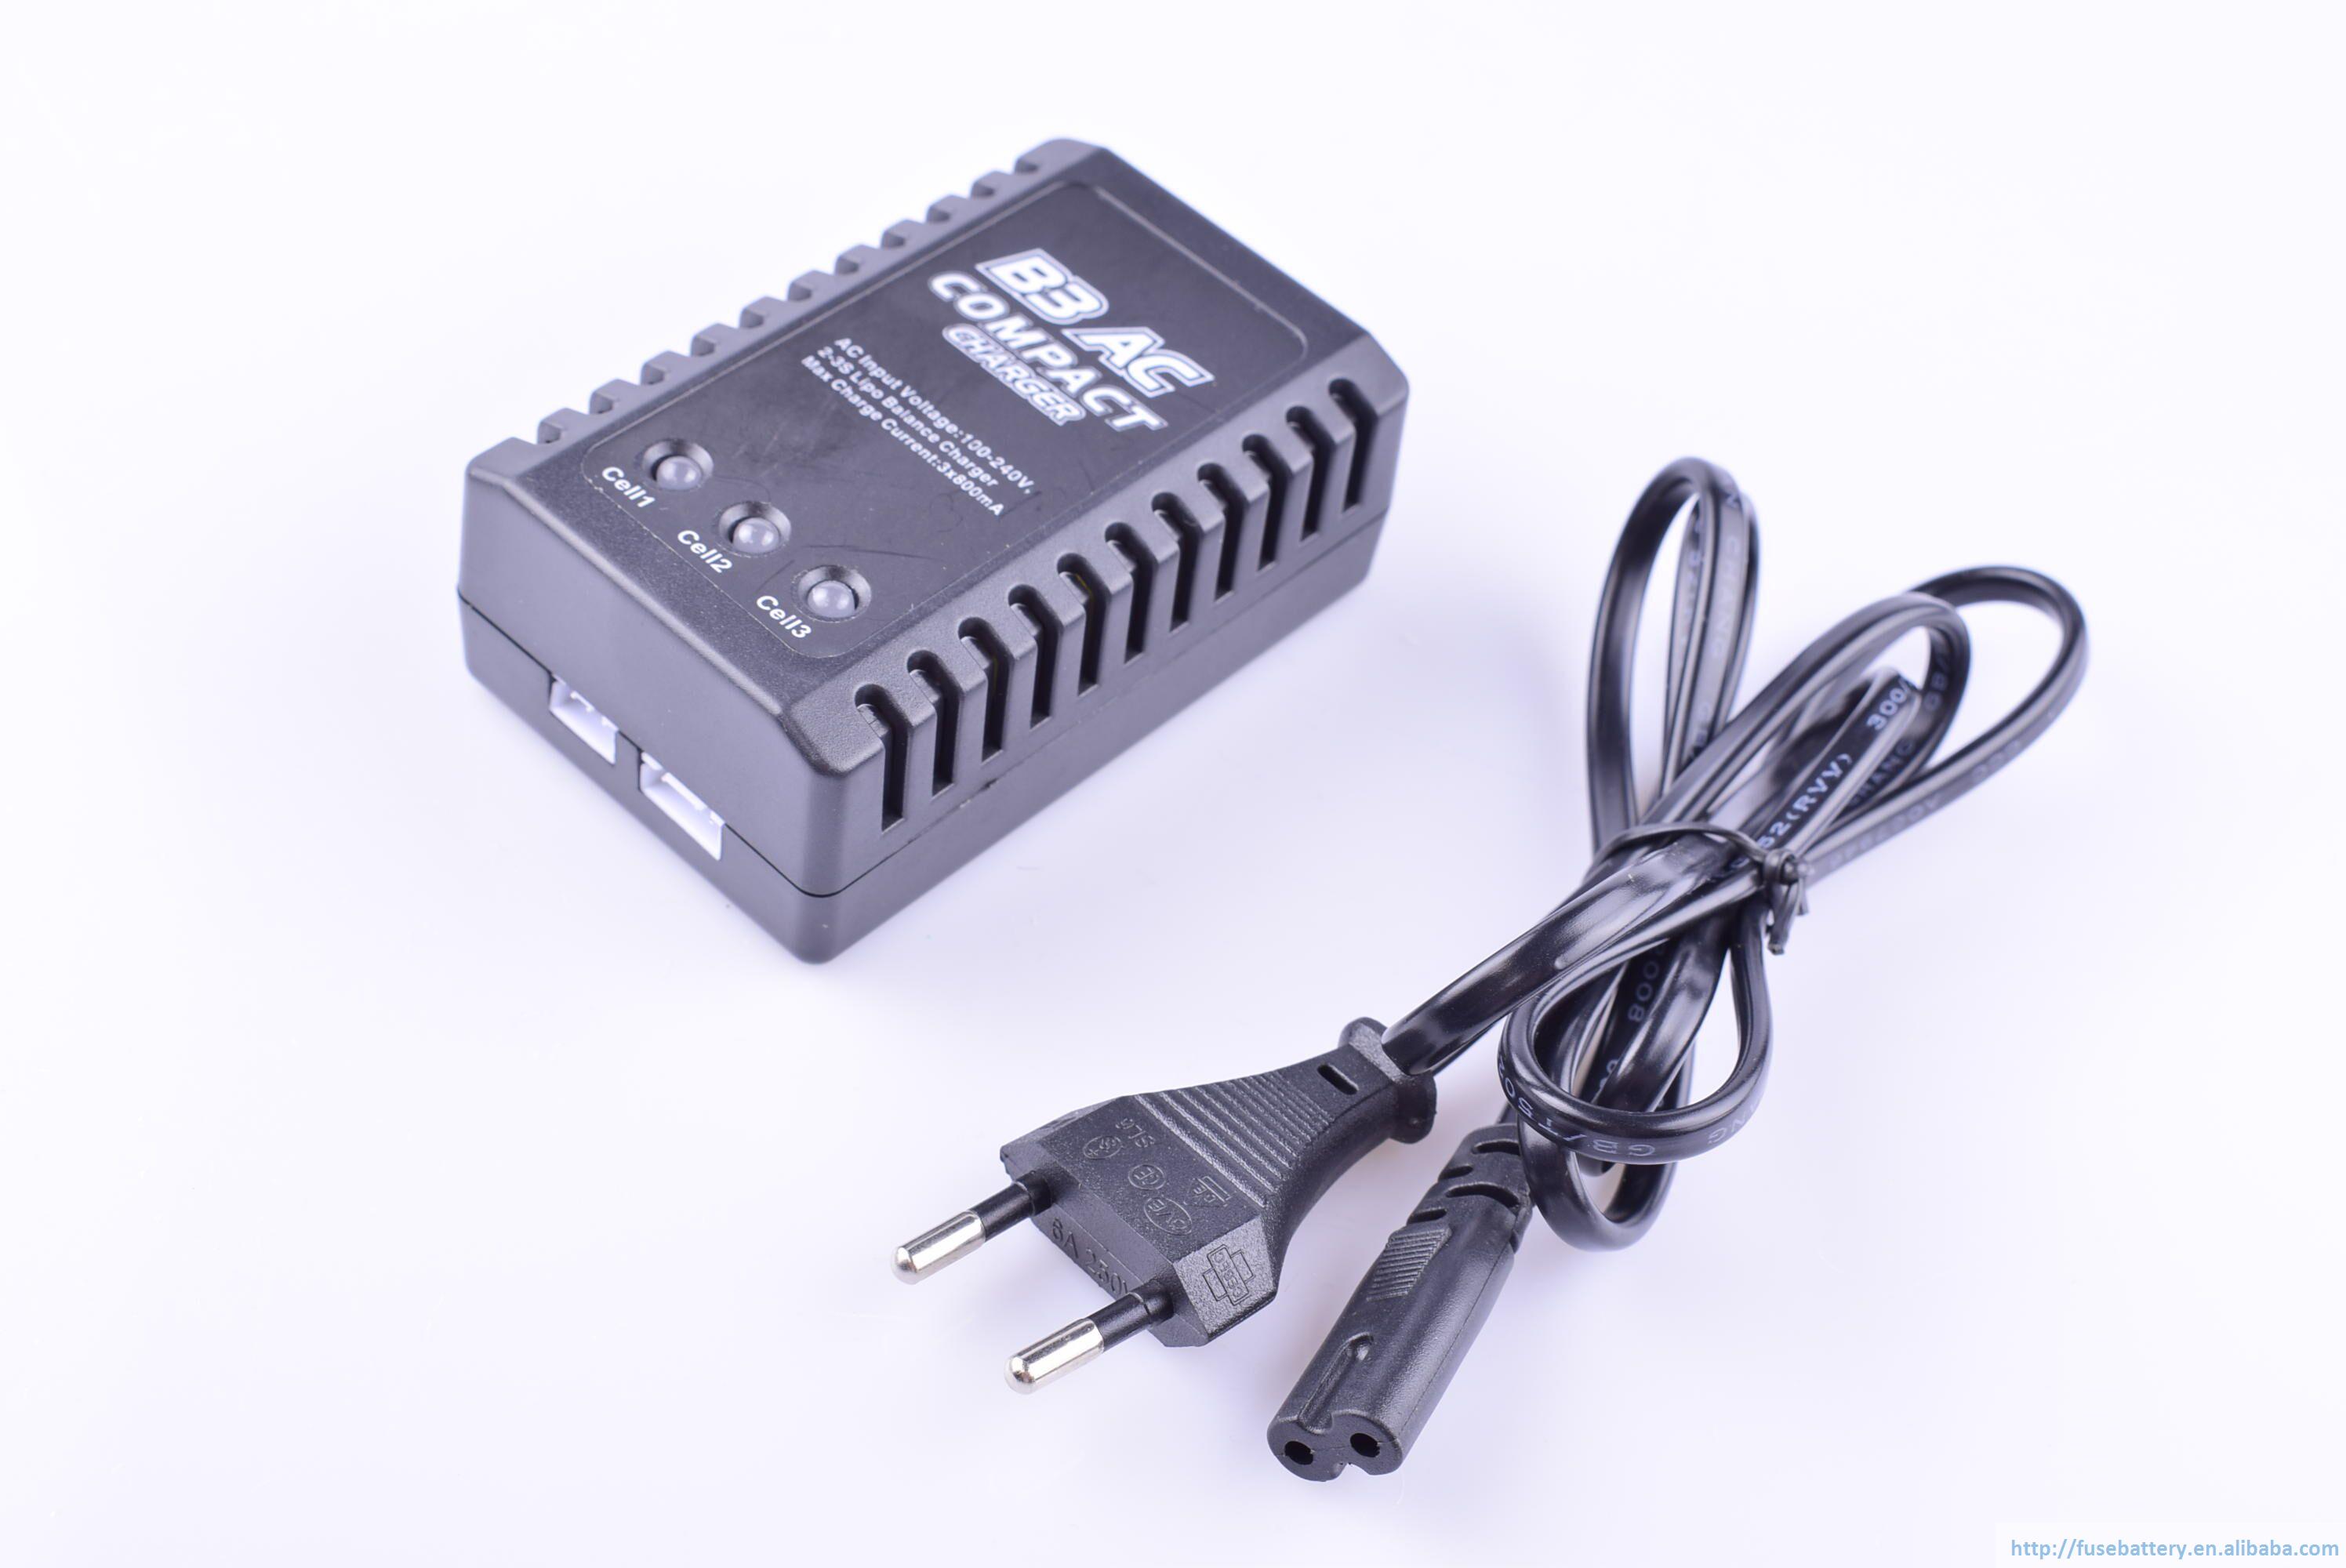 B3AC  Charger for all  lipo li-ion battery 